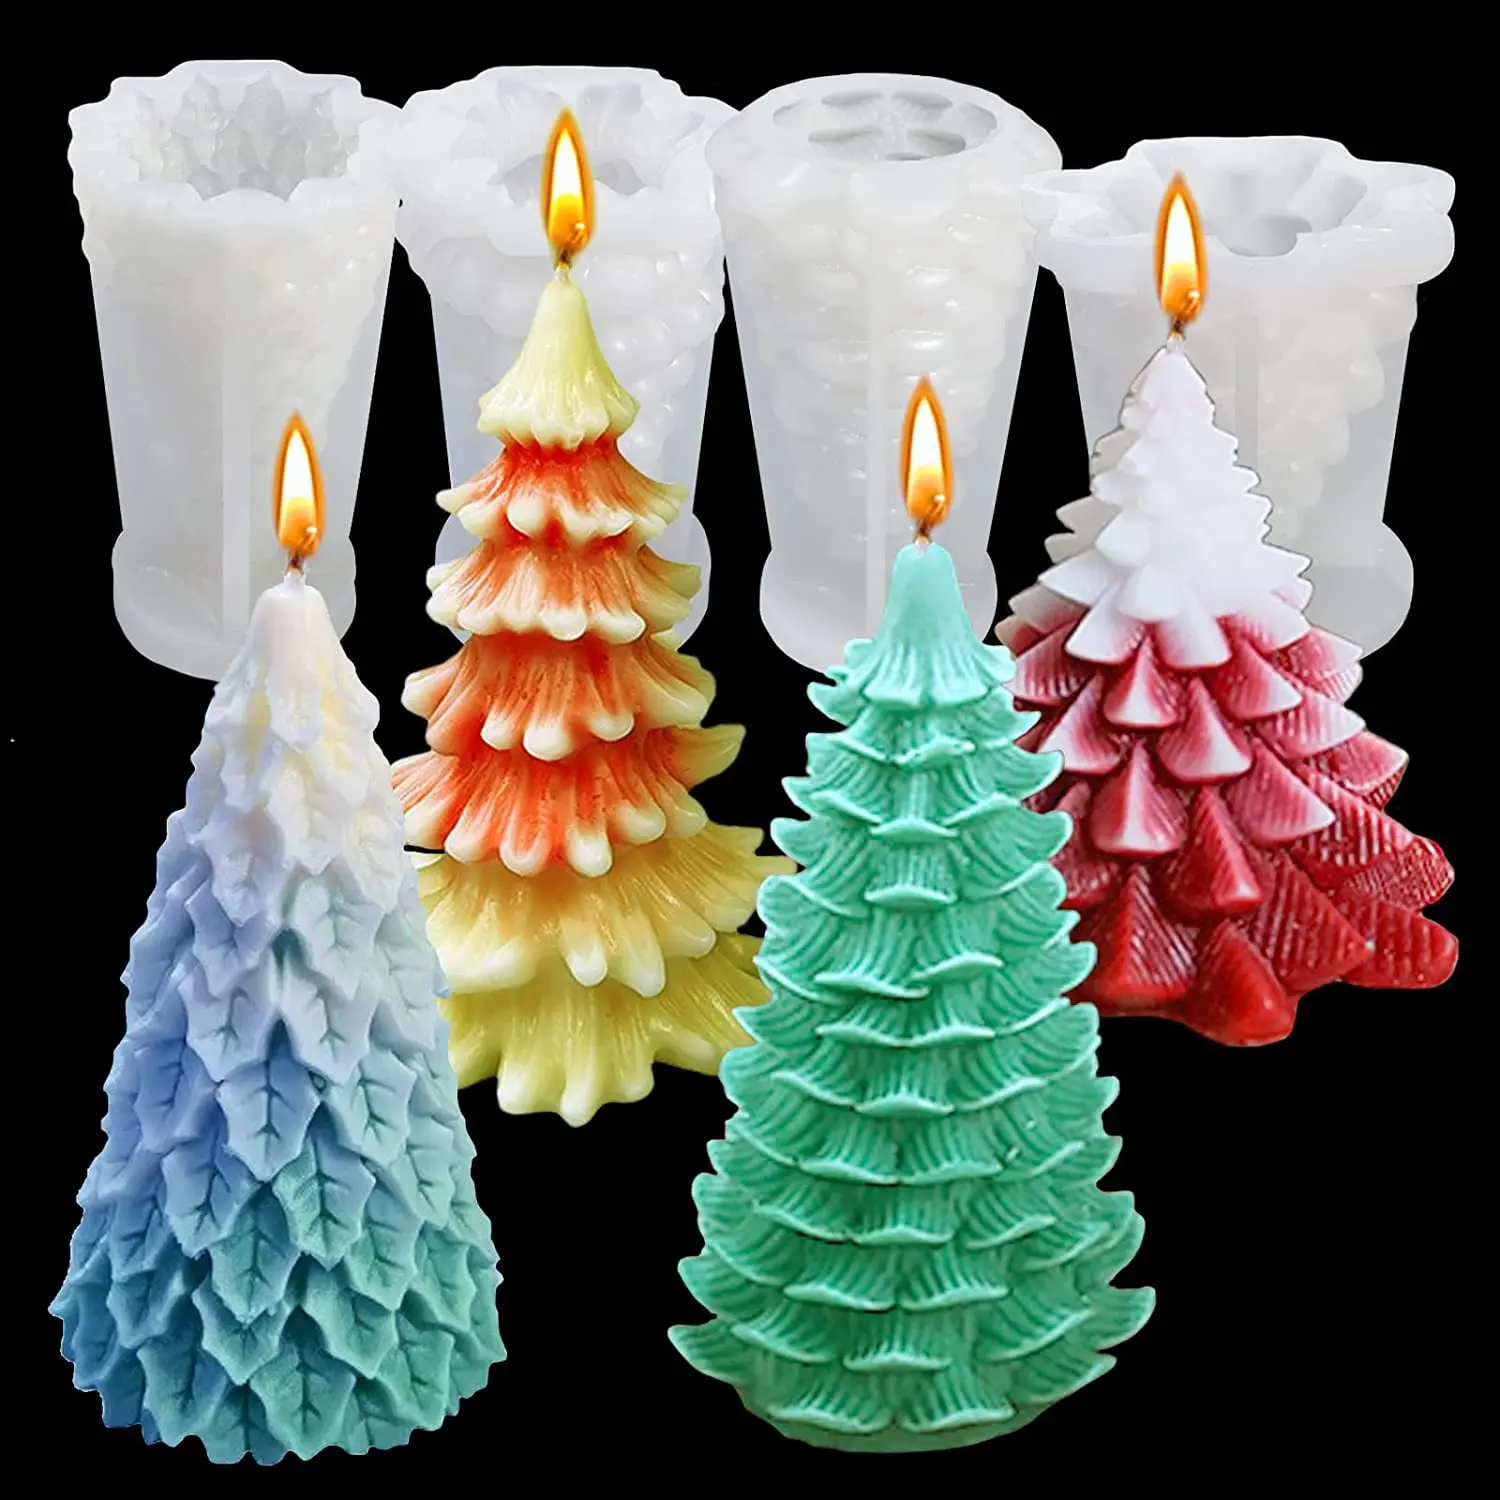 

Large 3D Christmas Tree Candle Silicone Mold DIY Aromatherapy Gypsum Soap Resin Ice Baking Pine Mold Home Decor Festival Gifts